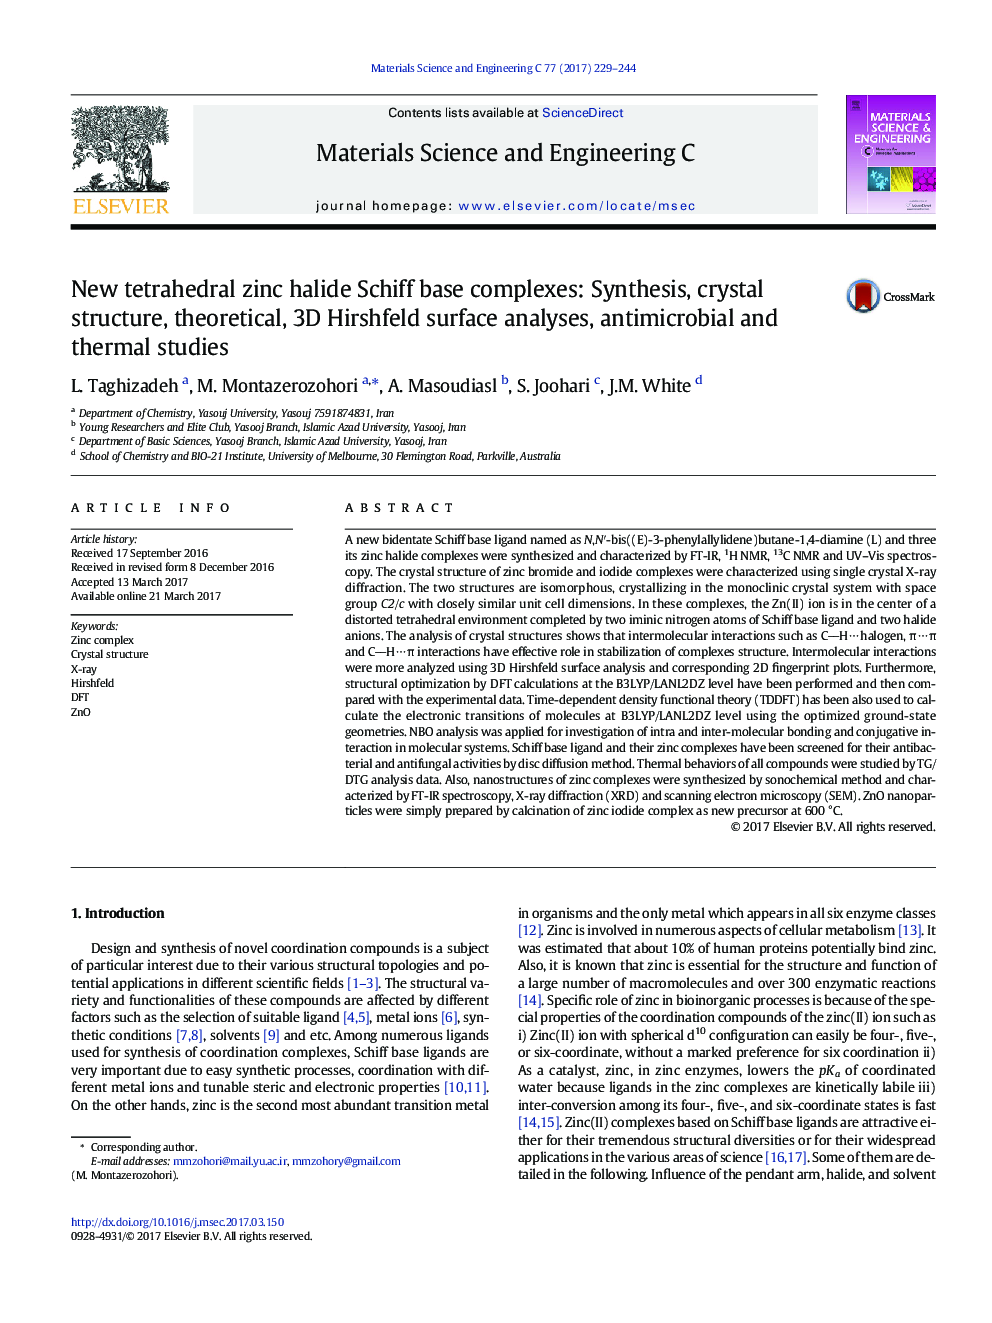 New tetrahedral zinc halide Schiff base complexes: Synthesis, crystal structure, theoretical, 3D Hirshfeld surface analyses, antimicrobial and thermal studies